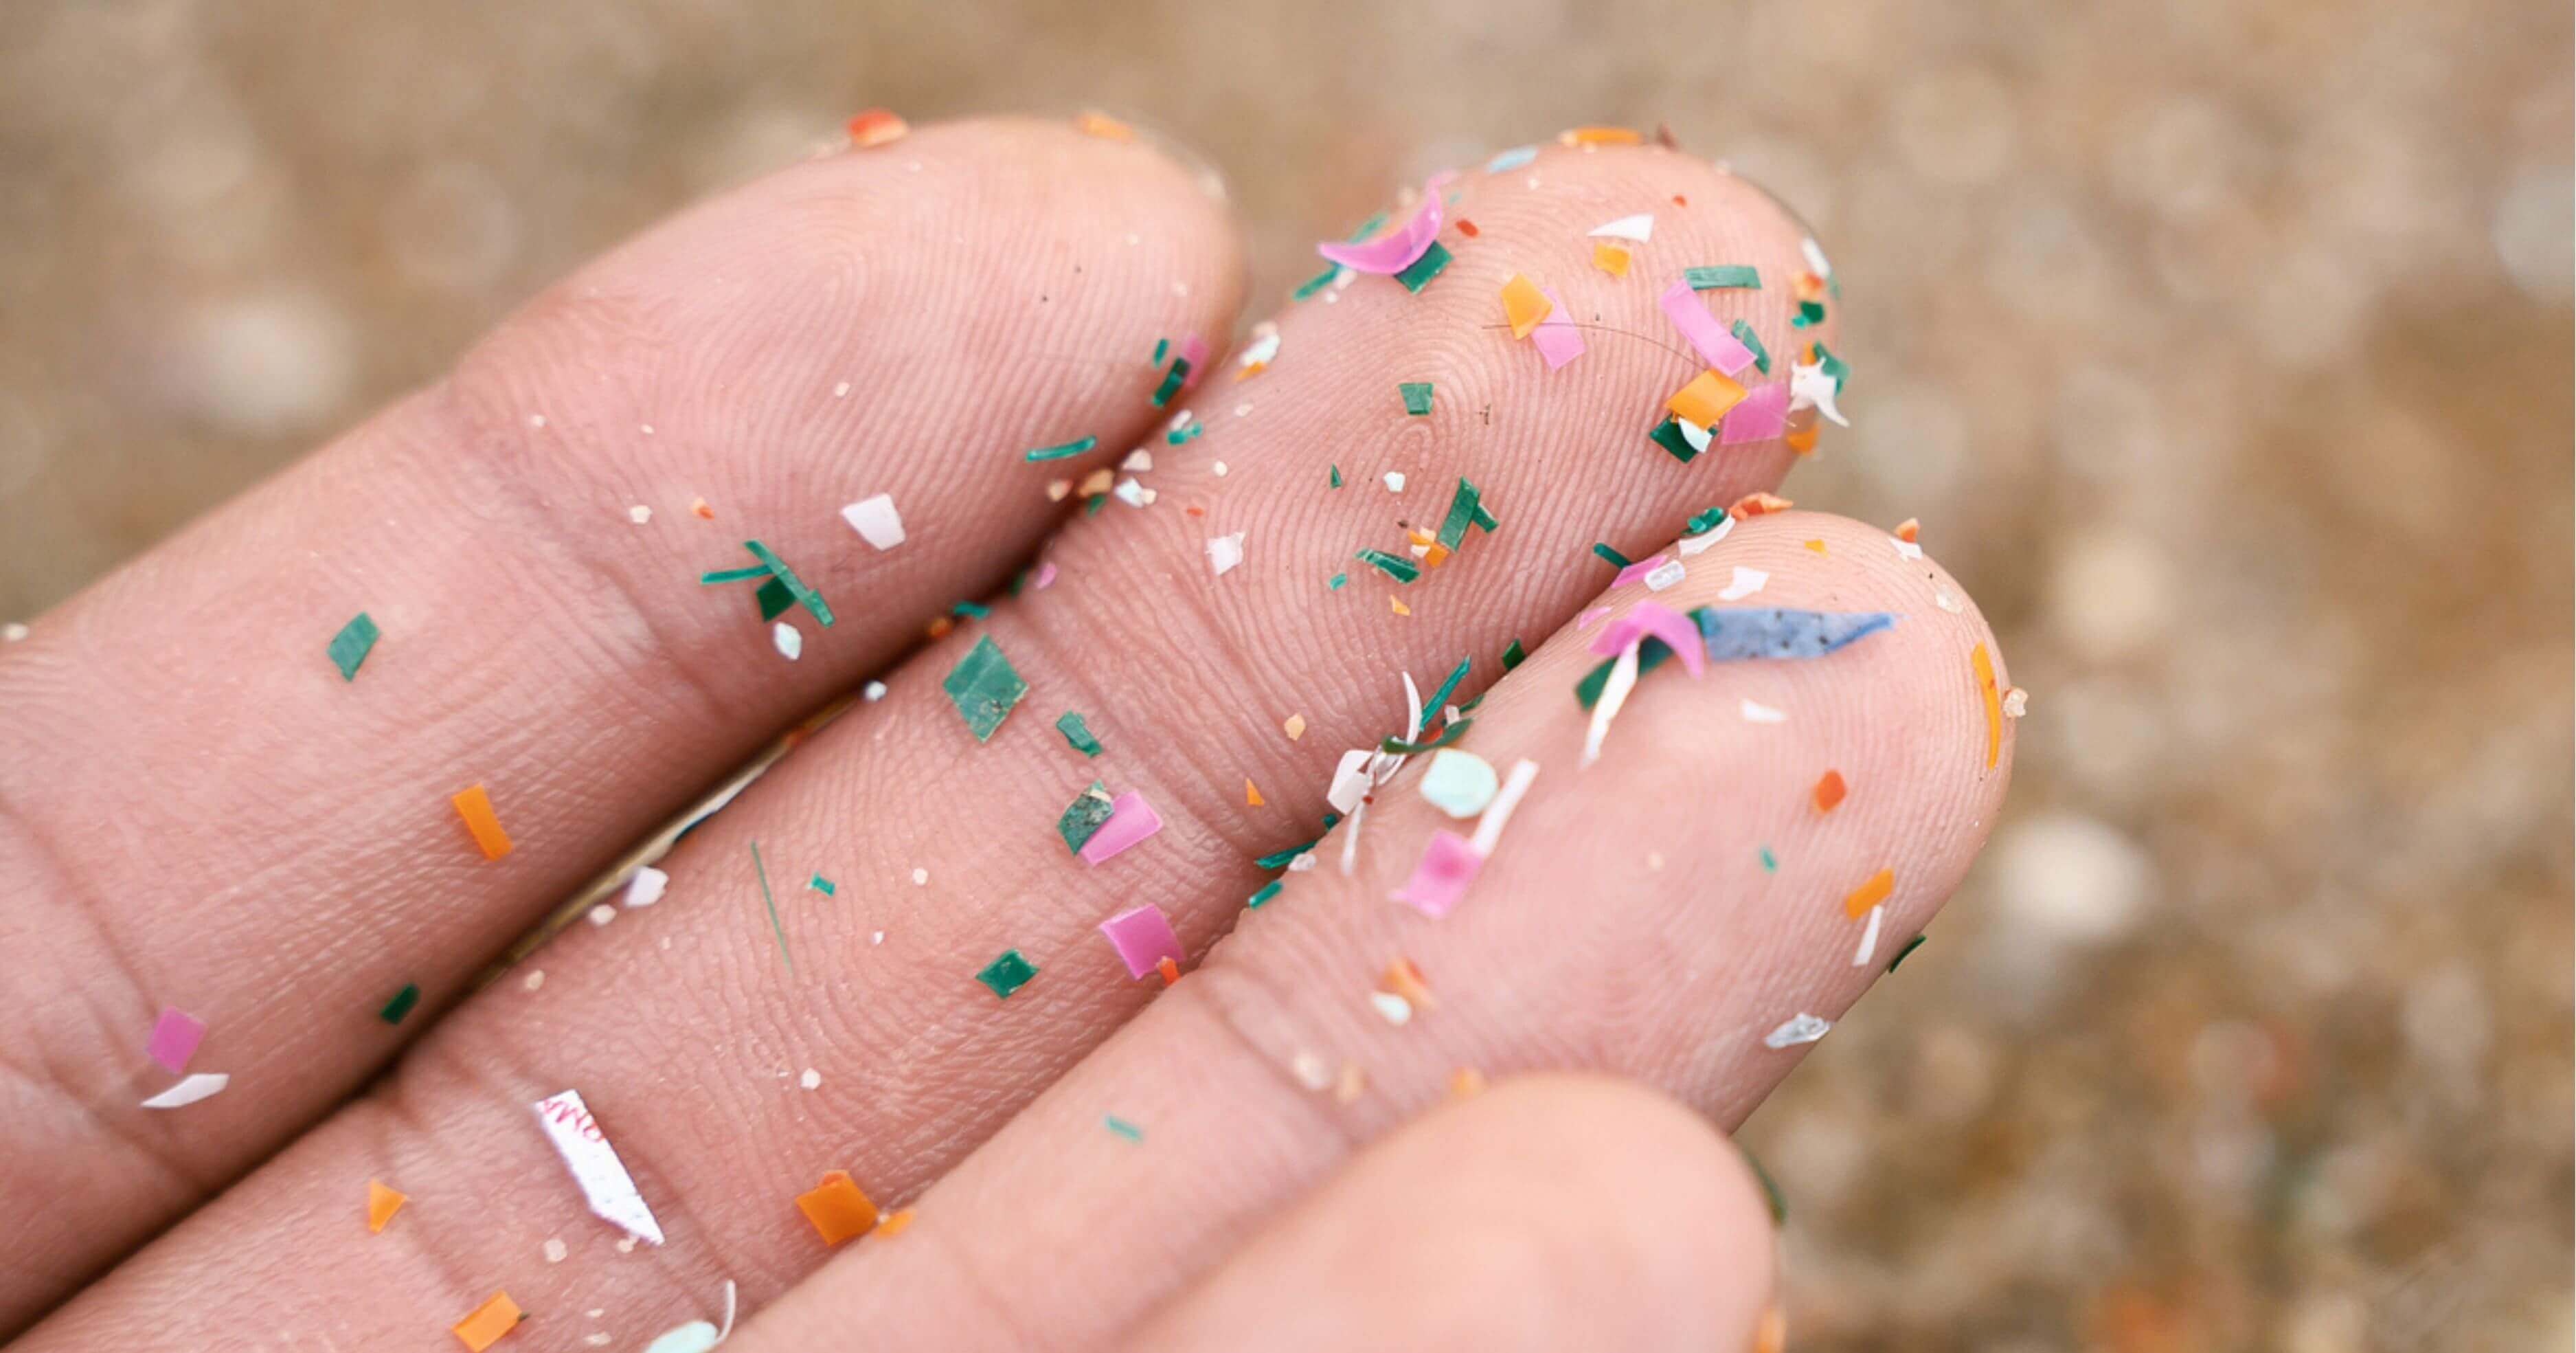 Tiny fragments of colourful plastic on someones fingers 